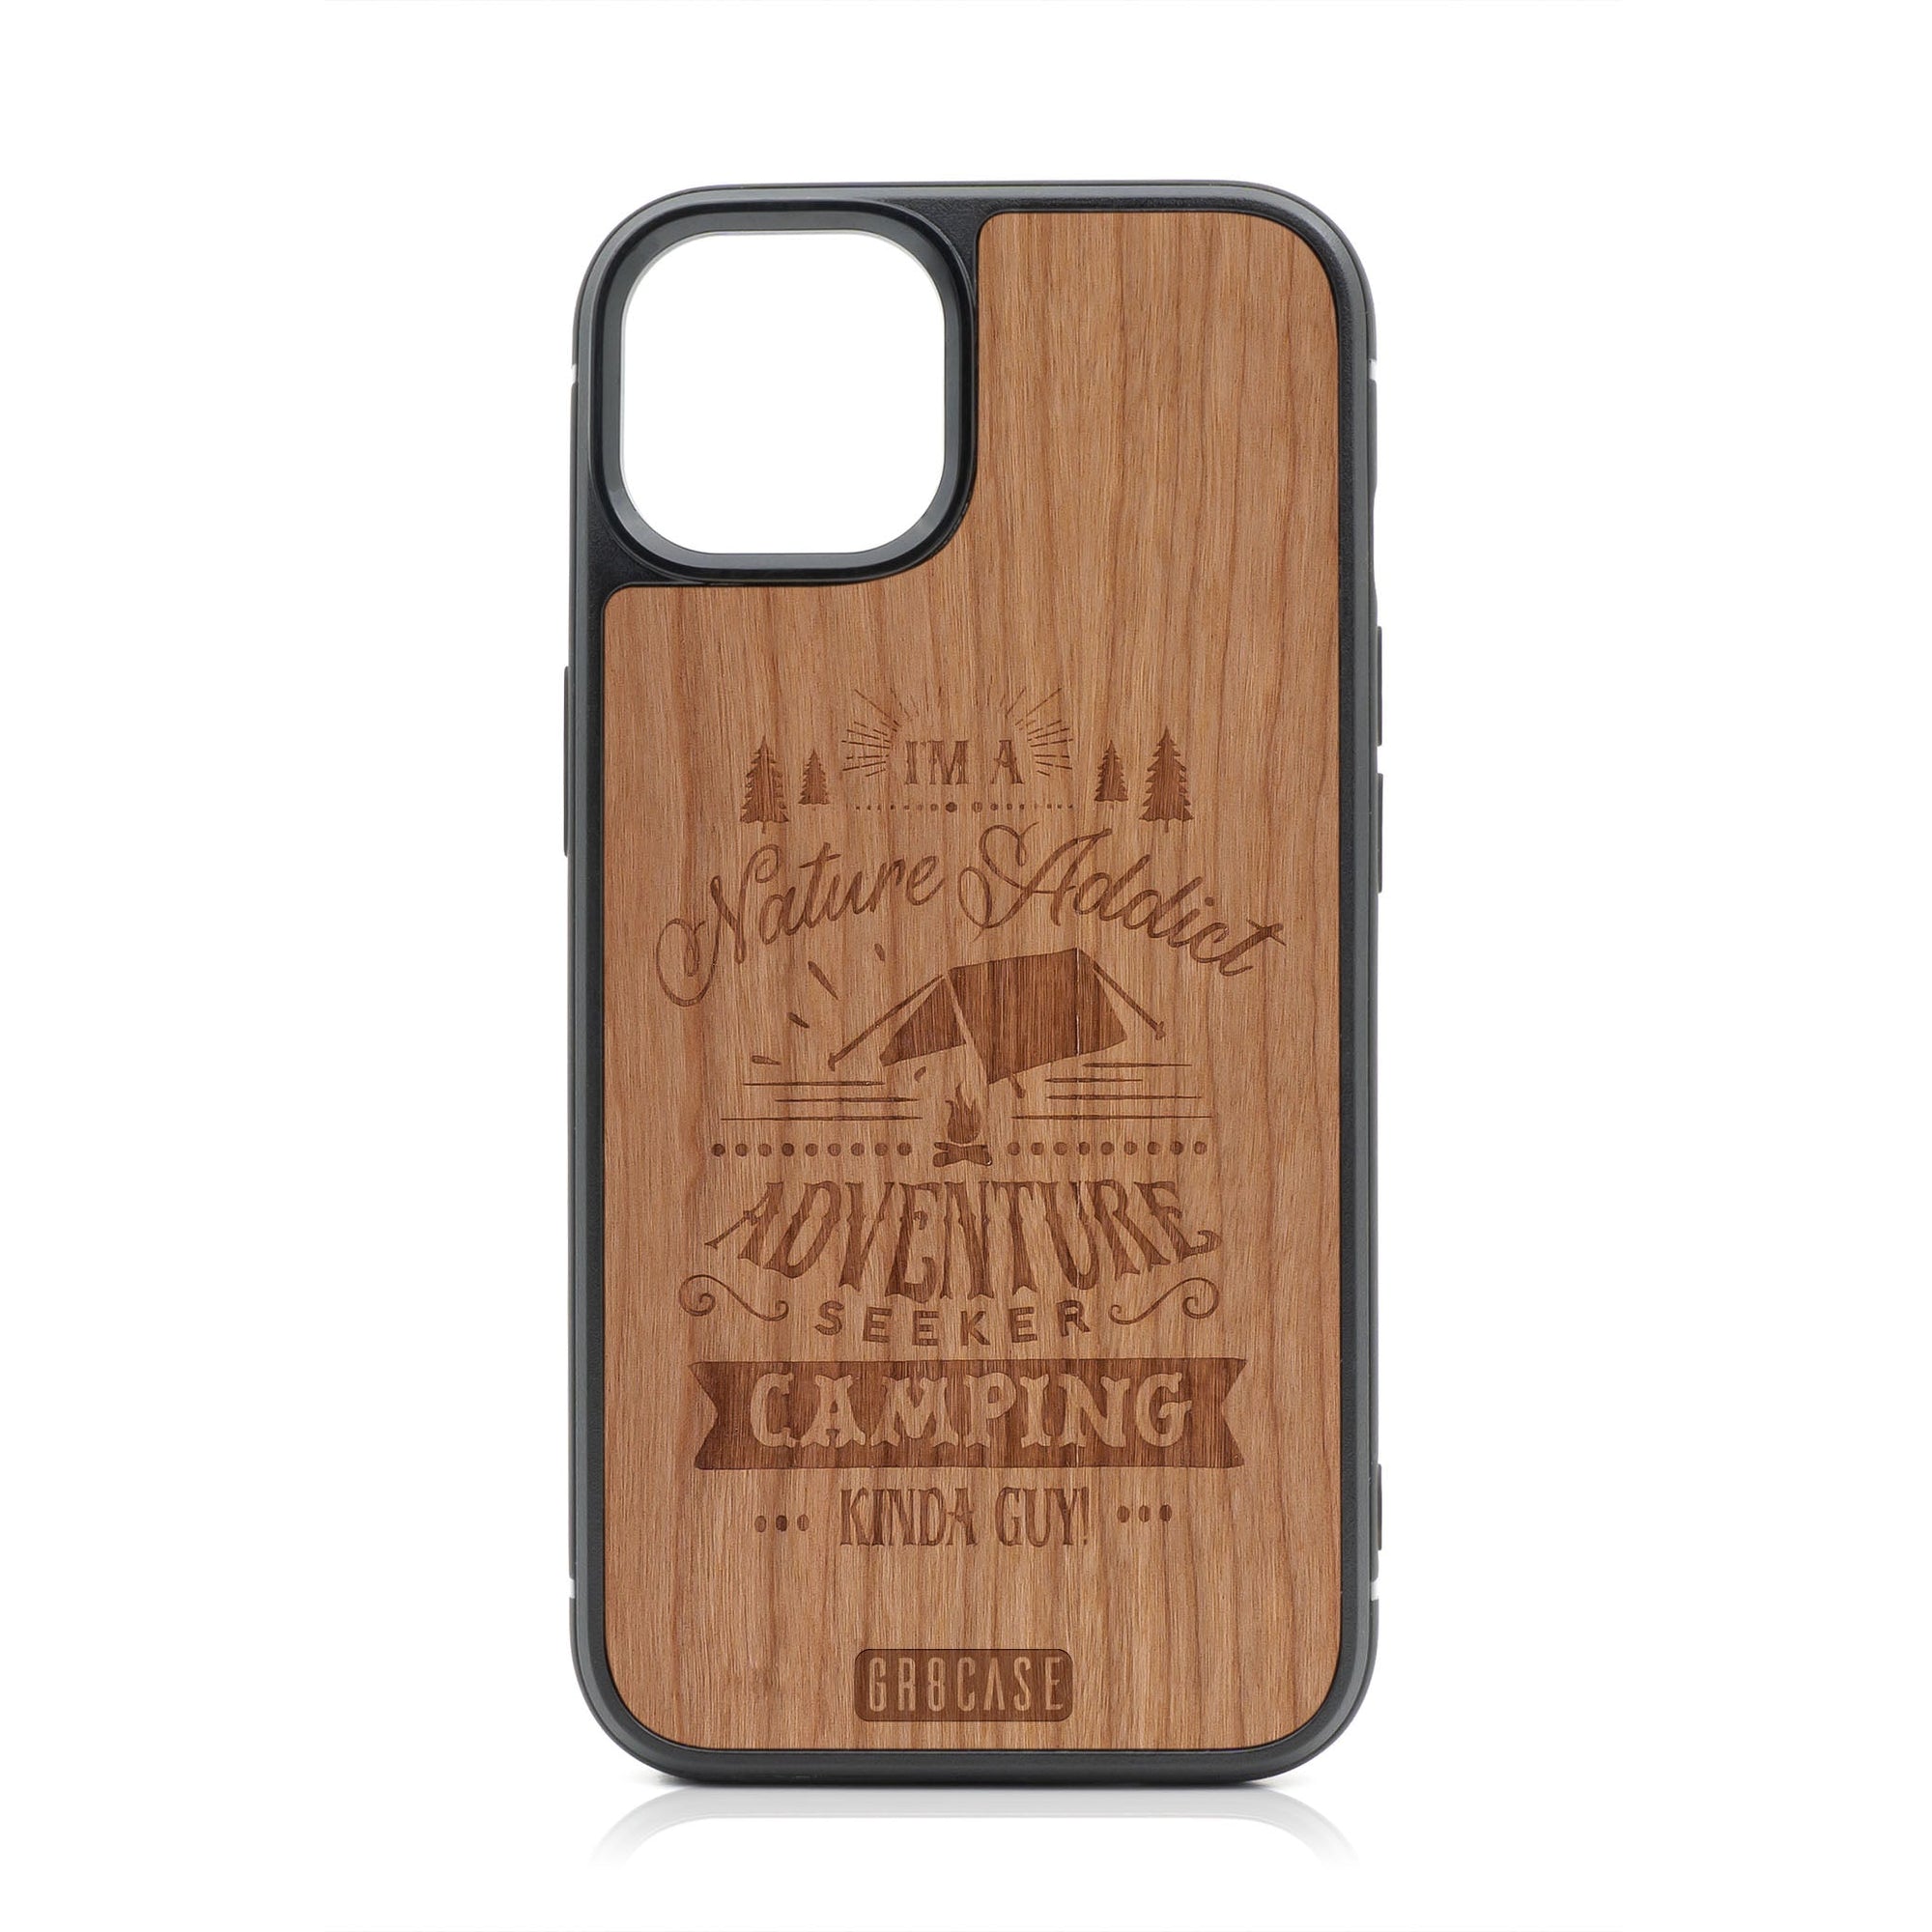 I'm A Nature Addict Adventure Seeker Camping Kinda Guy Design Wood Case For iPhone 14